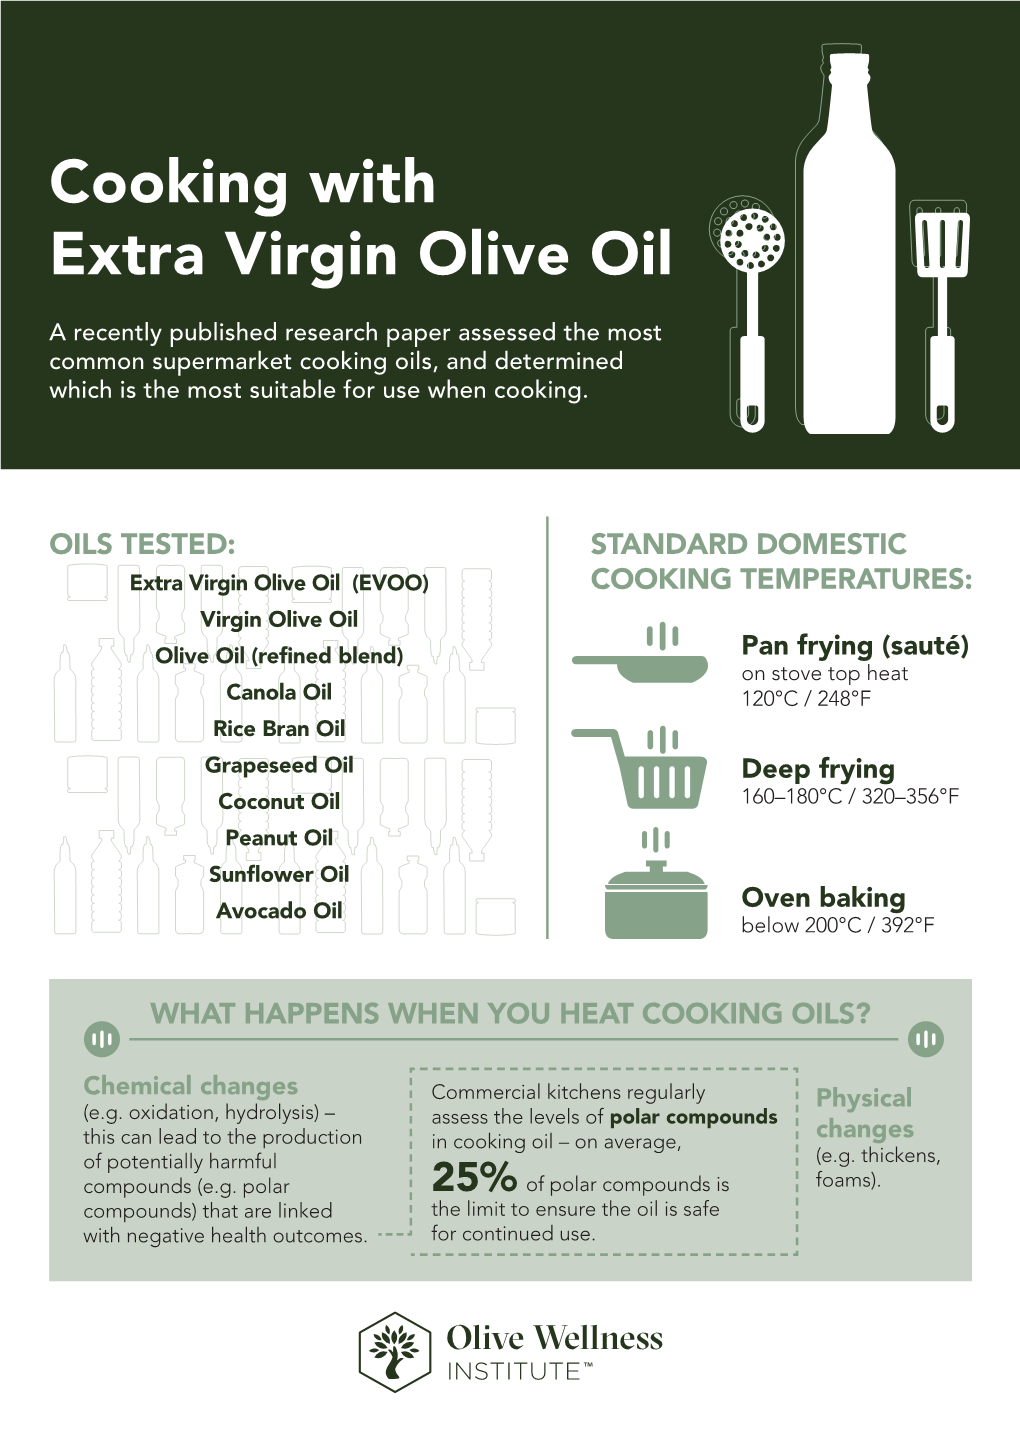 Cooking with Extra Virgin Olive Oil